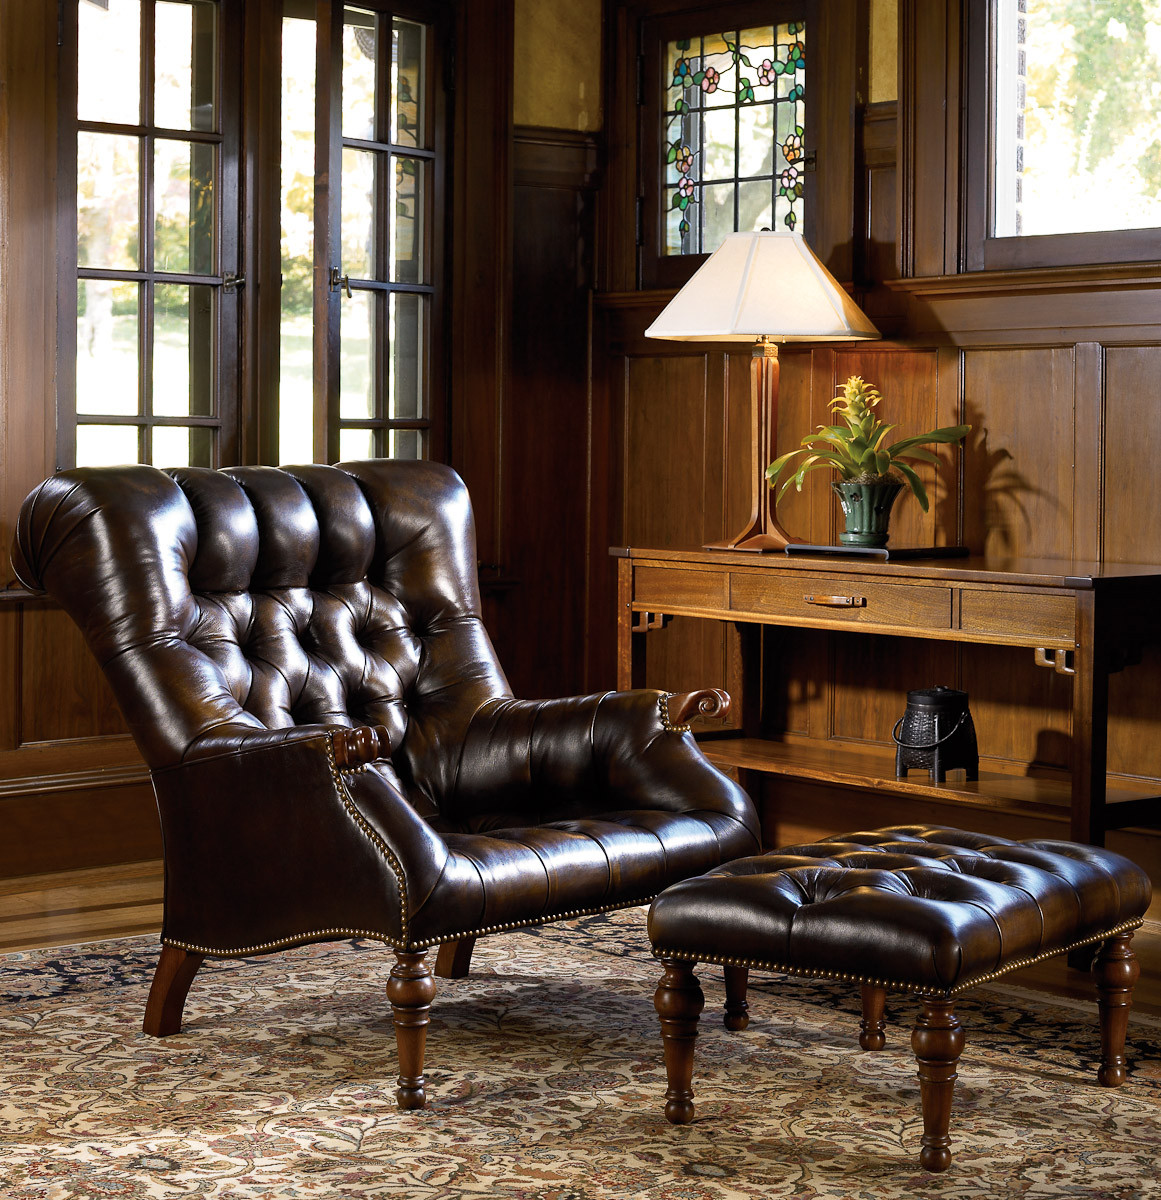 Living Room Recliner Chair
 Living Room Leather Furniture